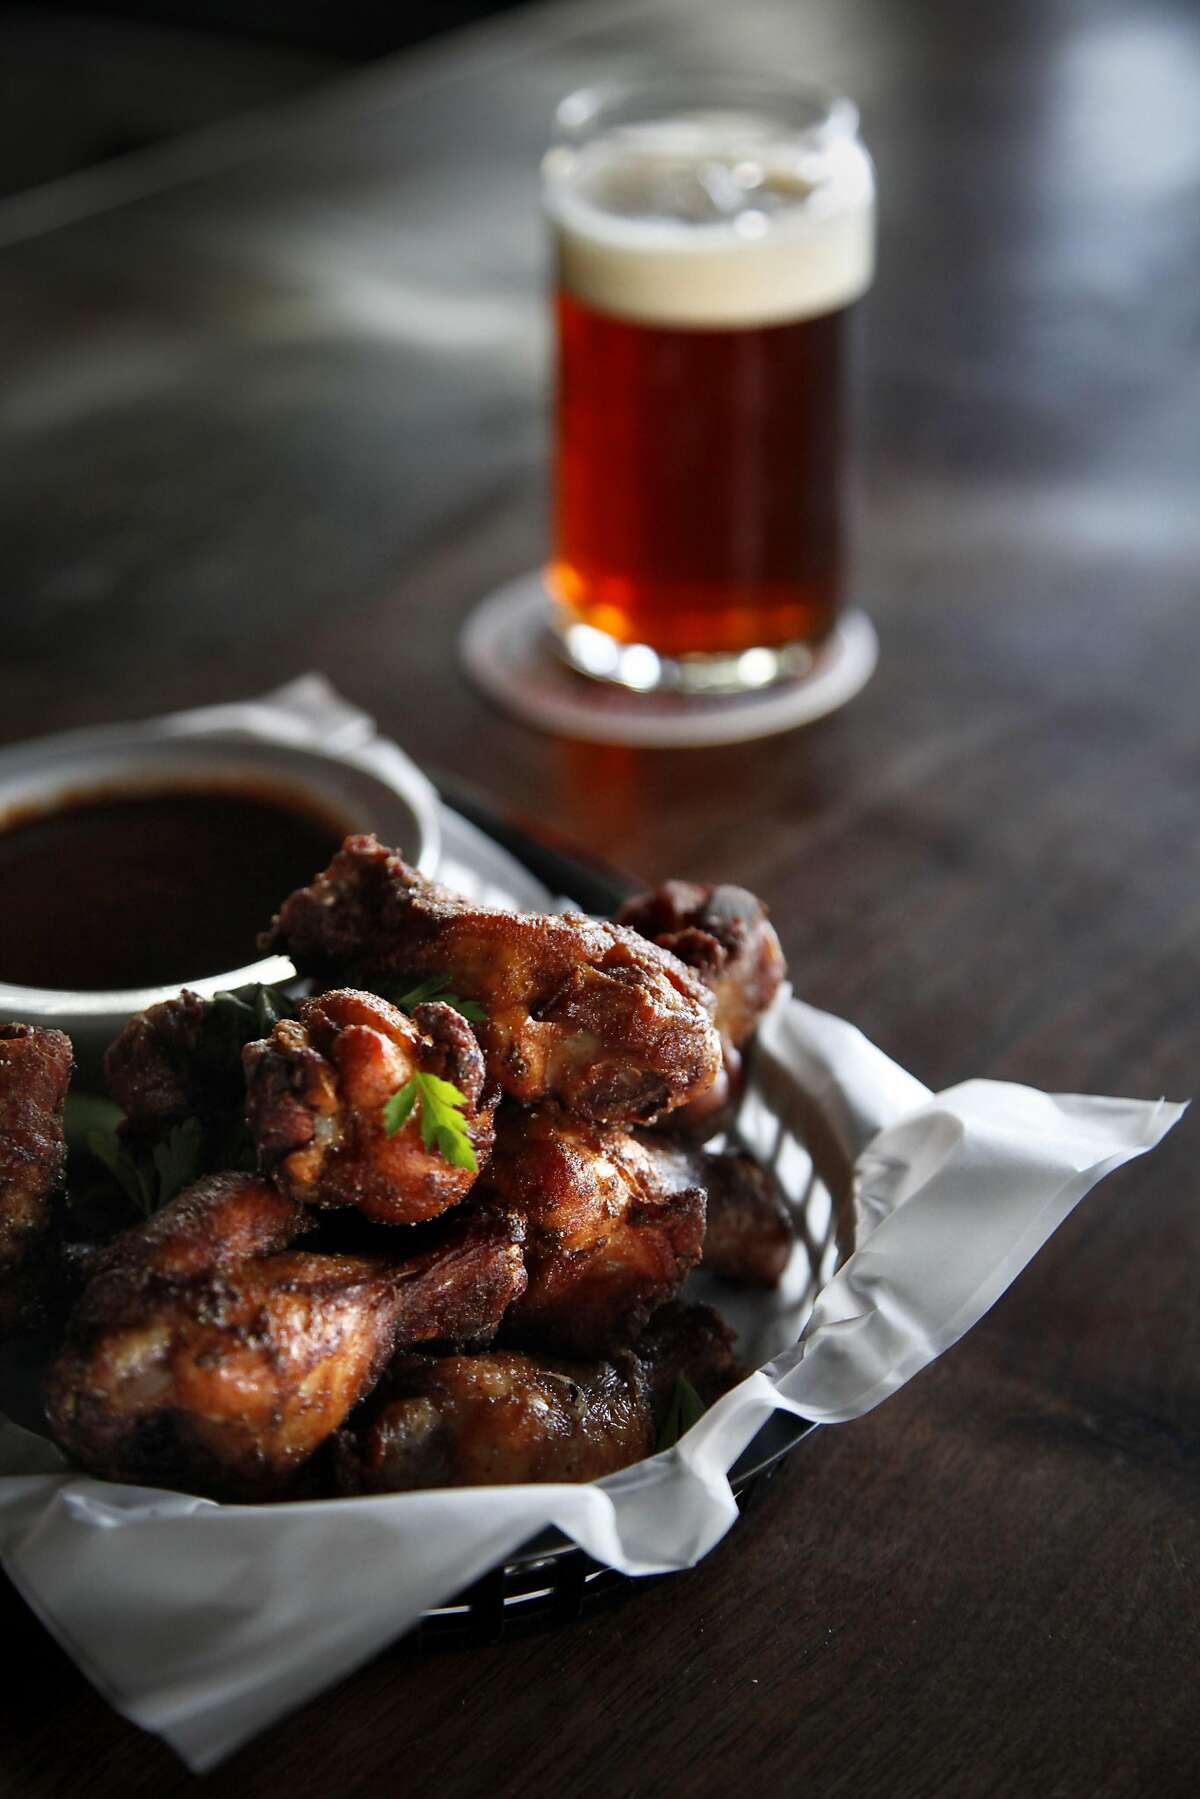 The cherry wood smoked wings are a specialty at Taps in Petaluma, Calif., on Tuesday, April 12, 2015.